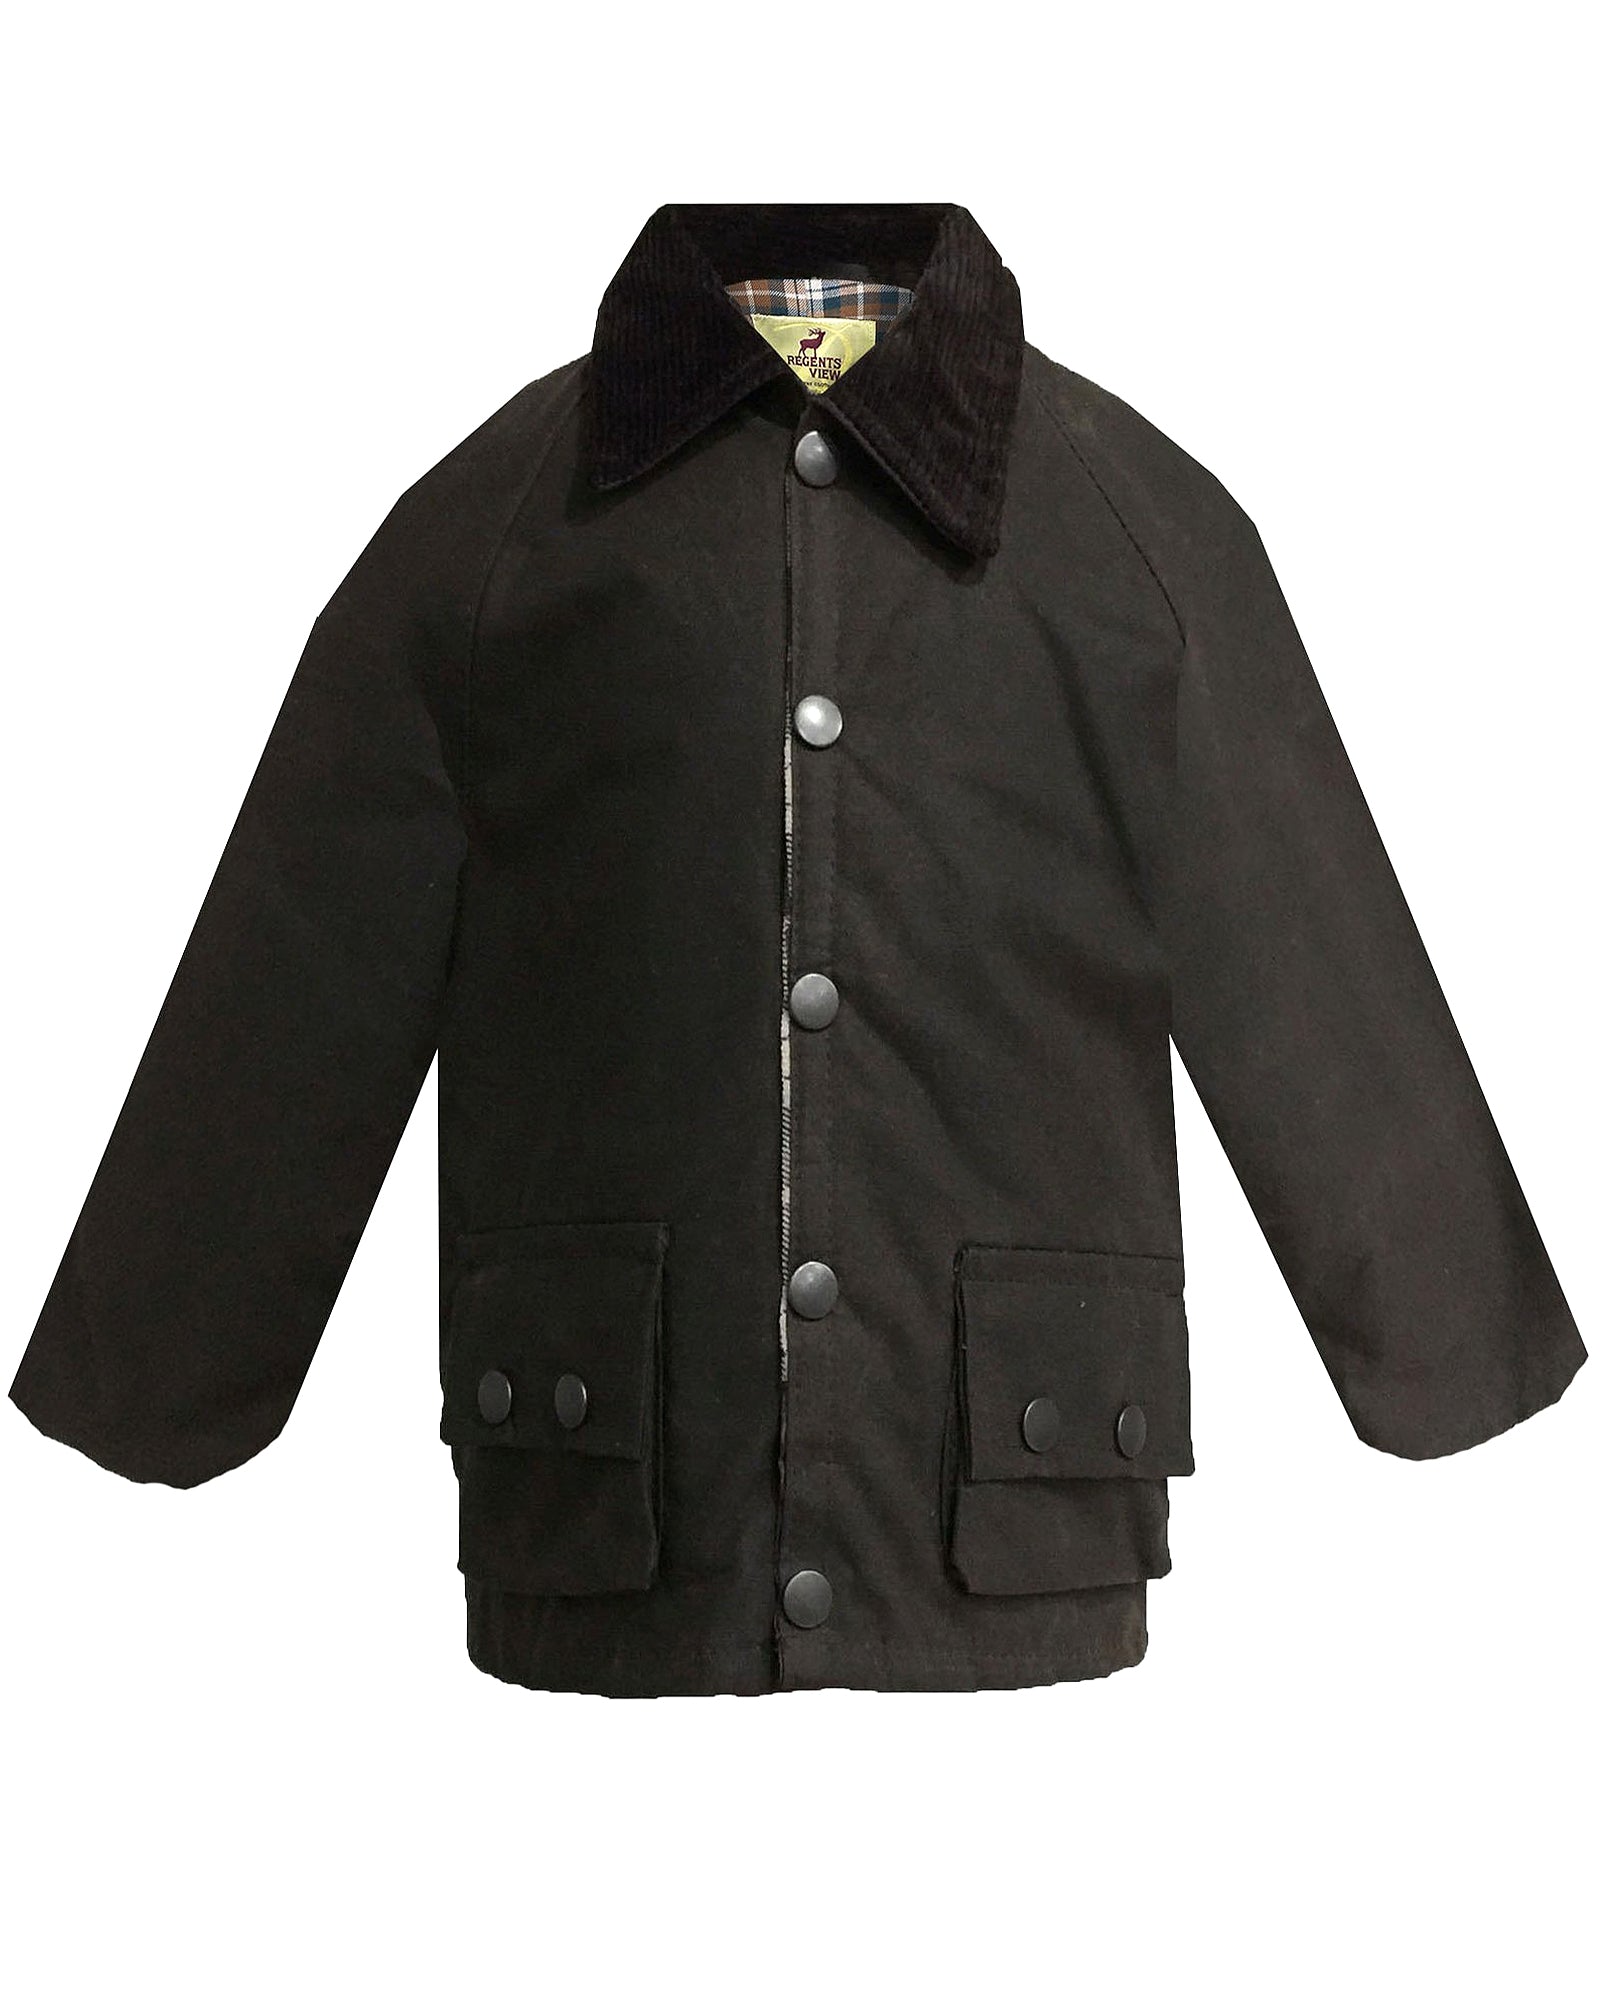 Regents View Childrens 100% Waxed Cotton Jacket - Brown